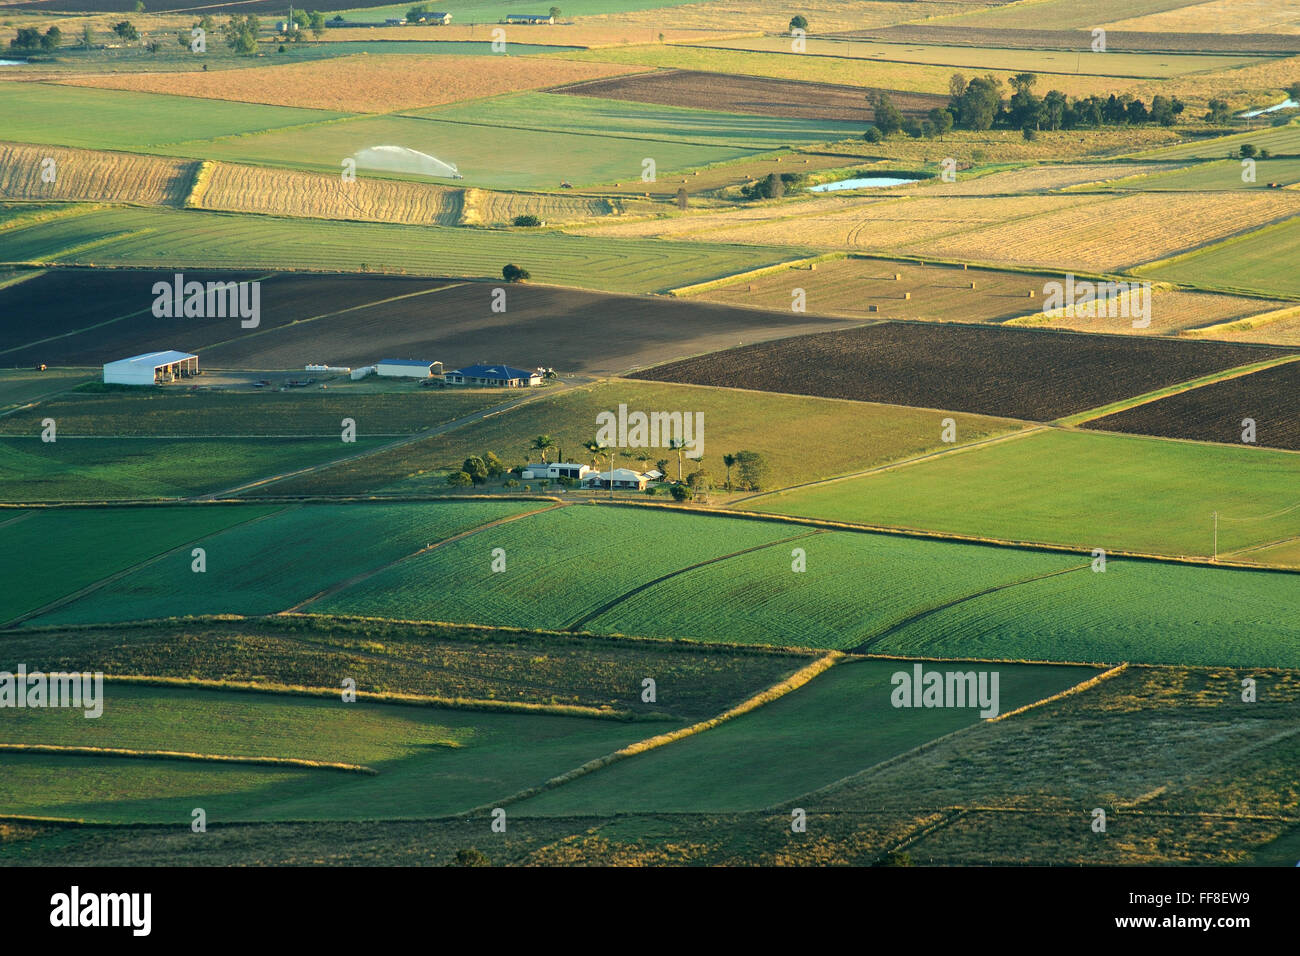 Aerial photograph of agriculture and farming of Queensland, Australia Stock Photo